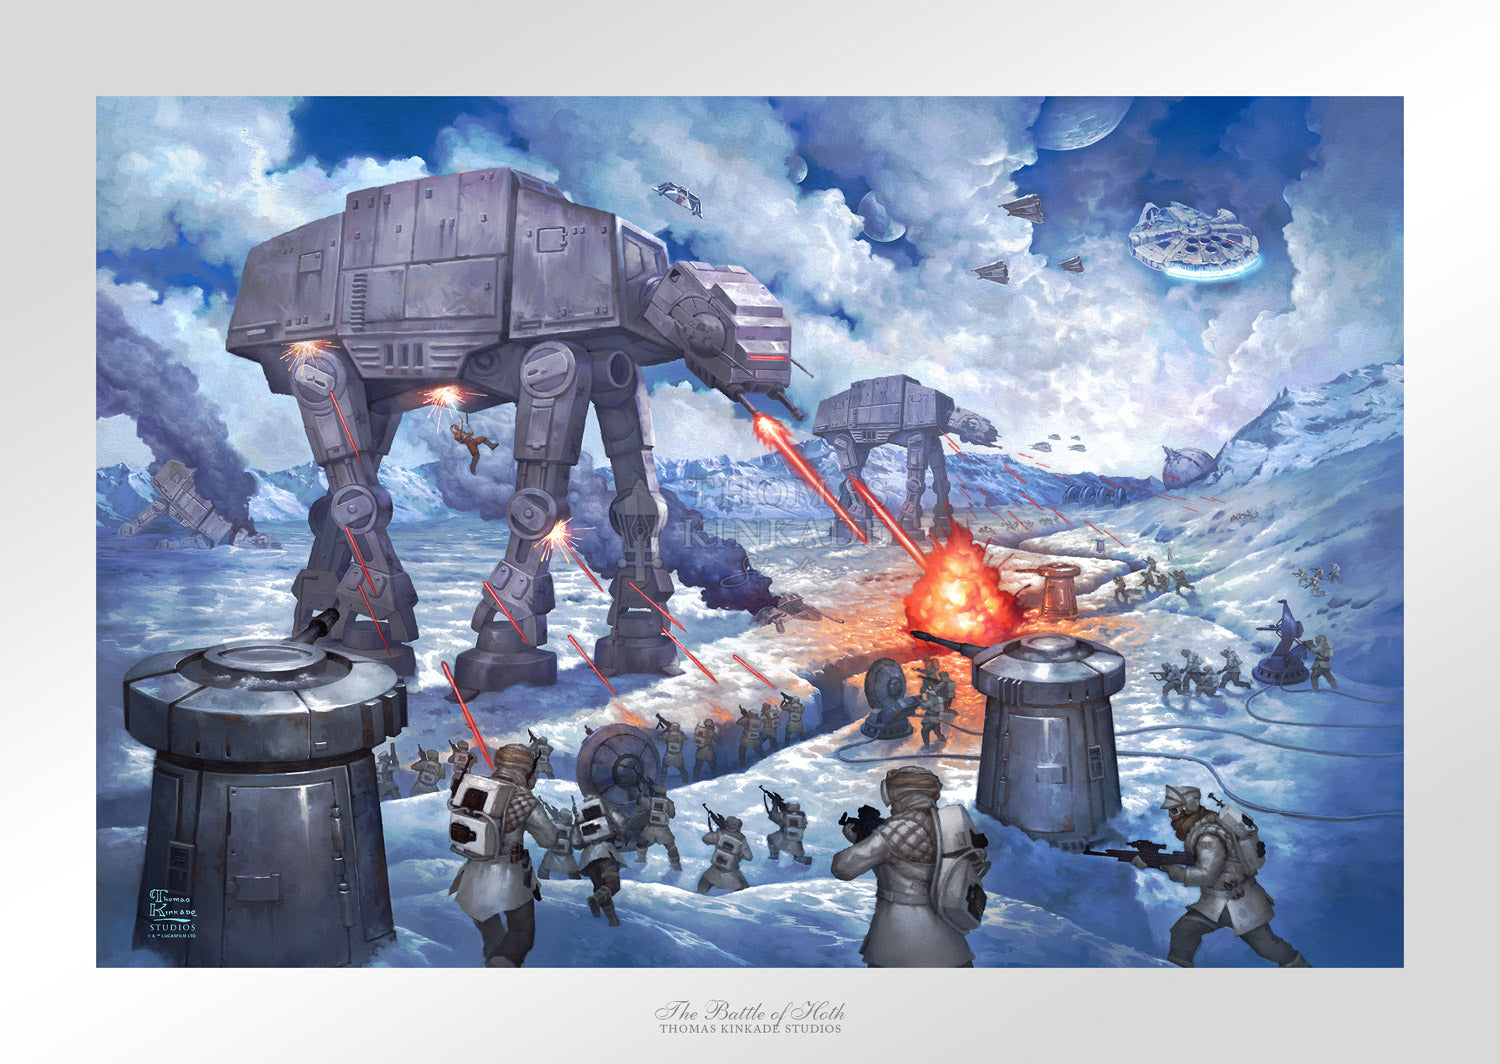 On the ice planet of Hoth™, the Rebel Squadrons battle the Imperial AT-STs and massive AT-ATs led by General Veers. Unframed